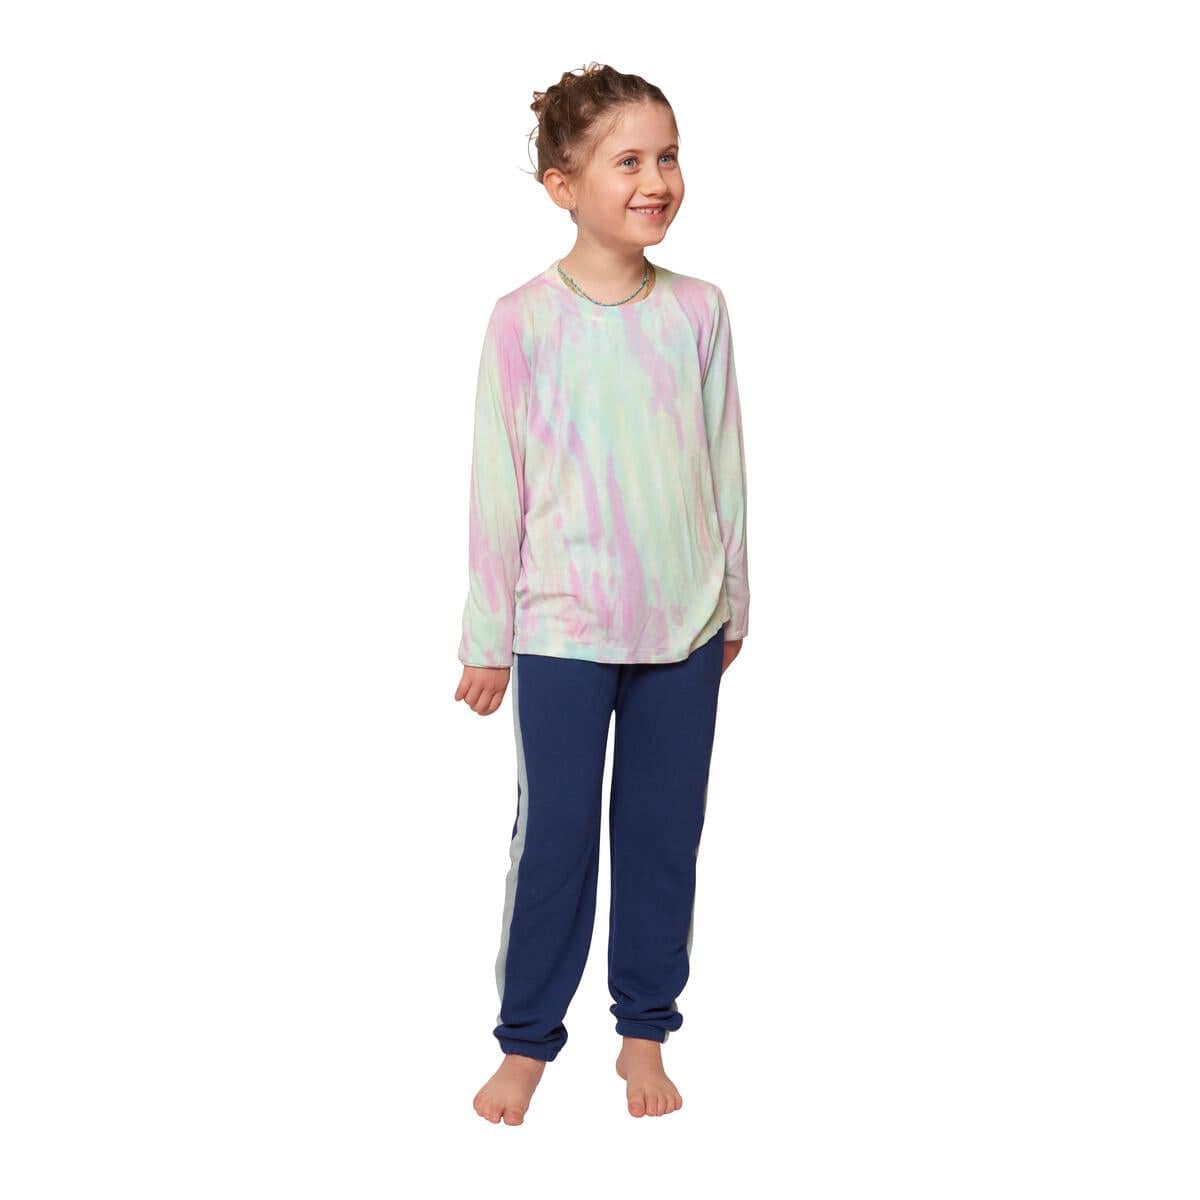 Bamboo Top in Prism - Twinkle Twinkle Little One